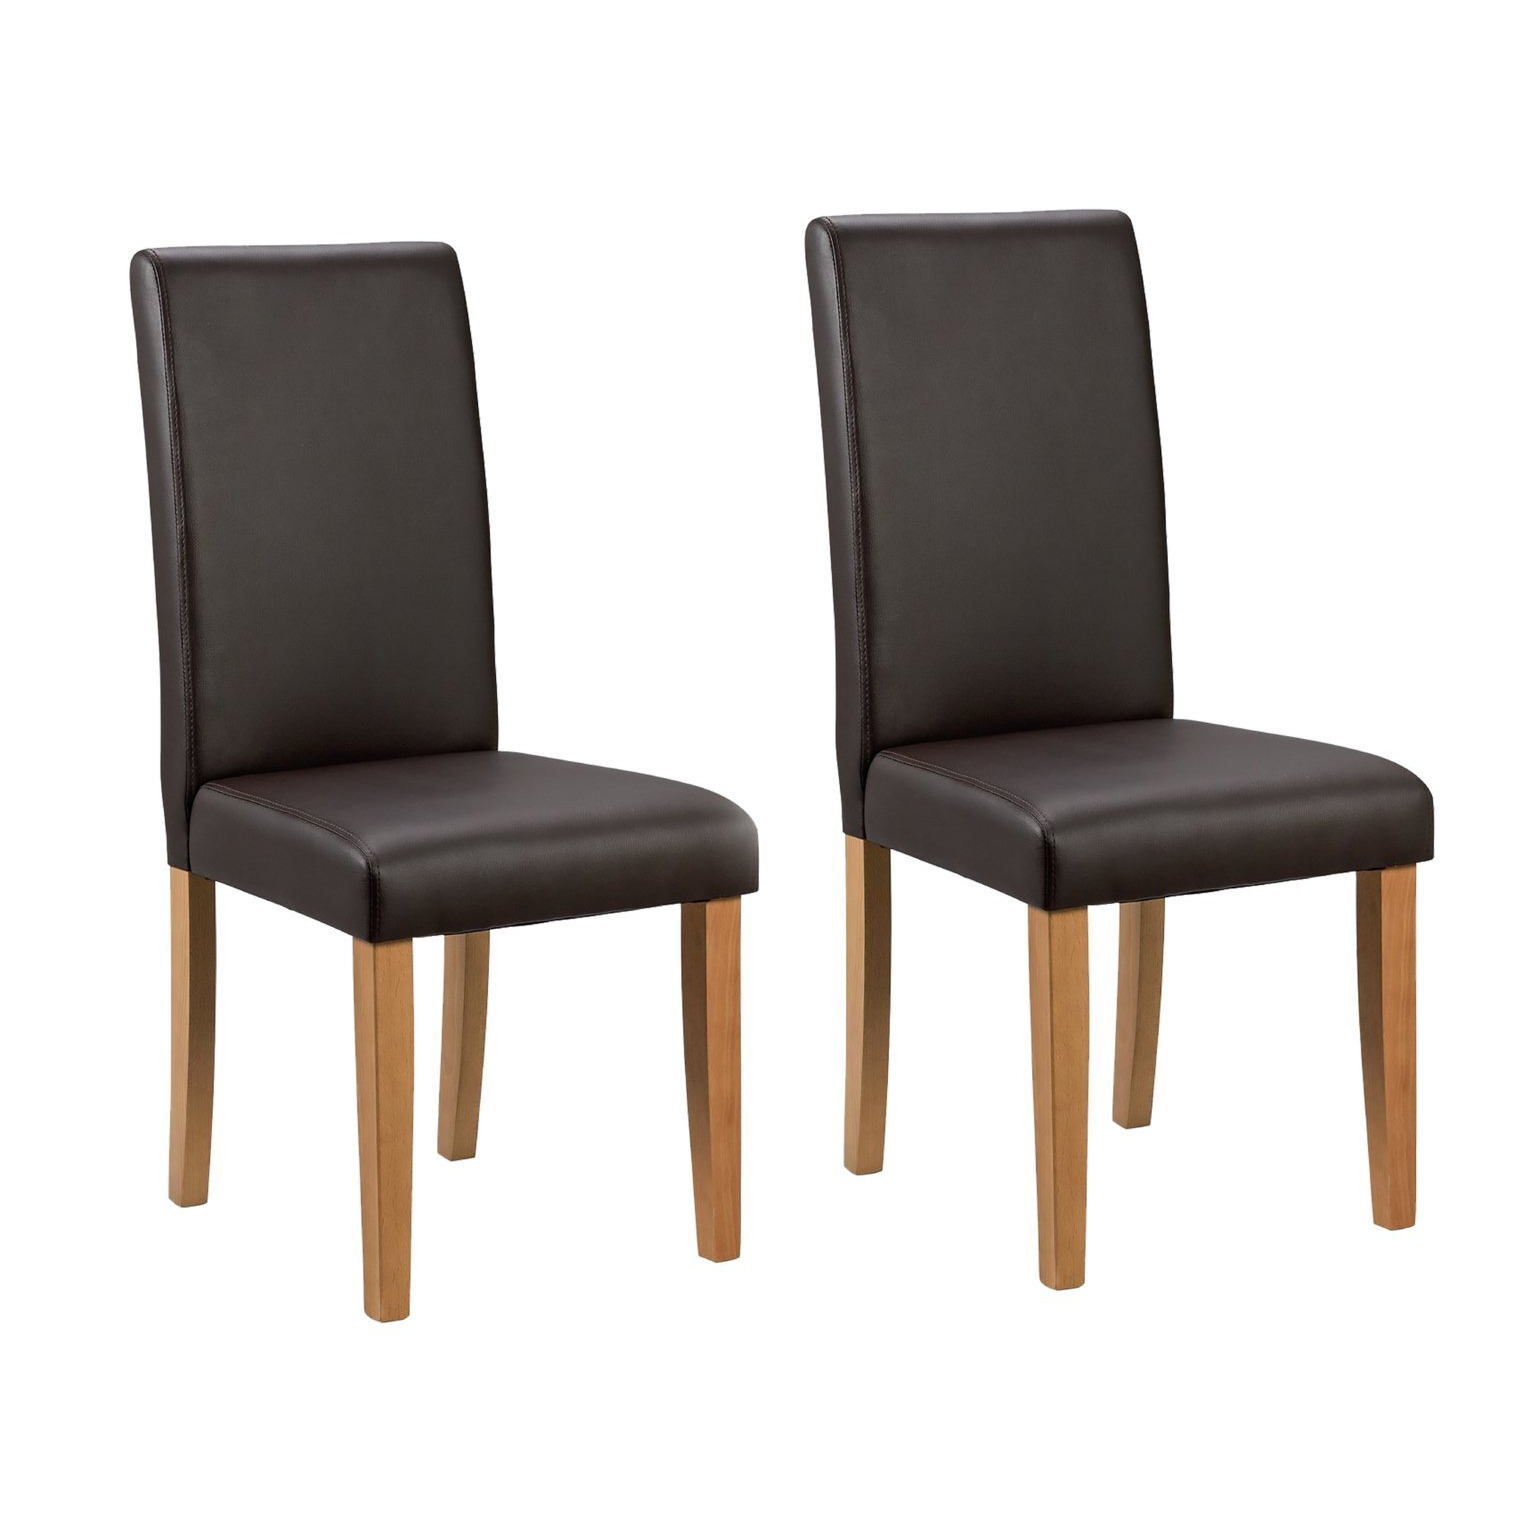 Argos Home Pair of Midback Dining Chairs - Chocolate - image 1